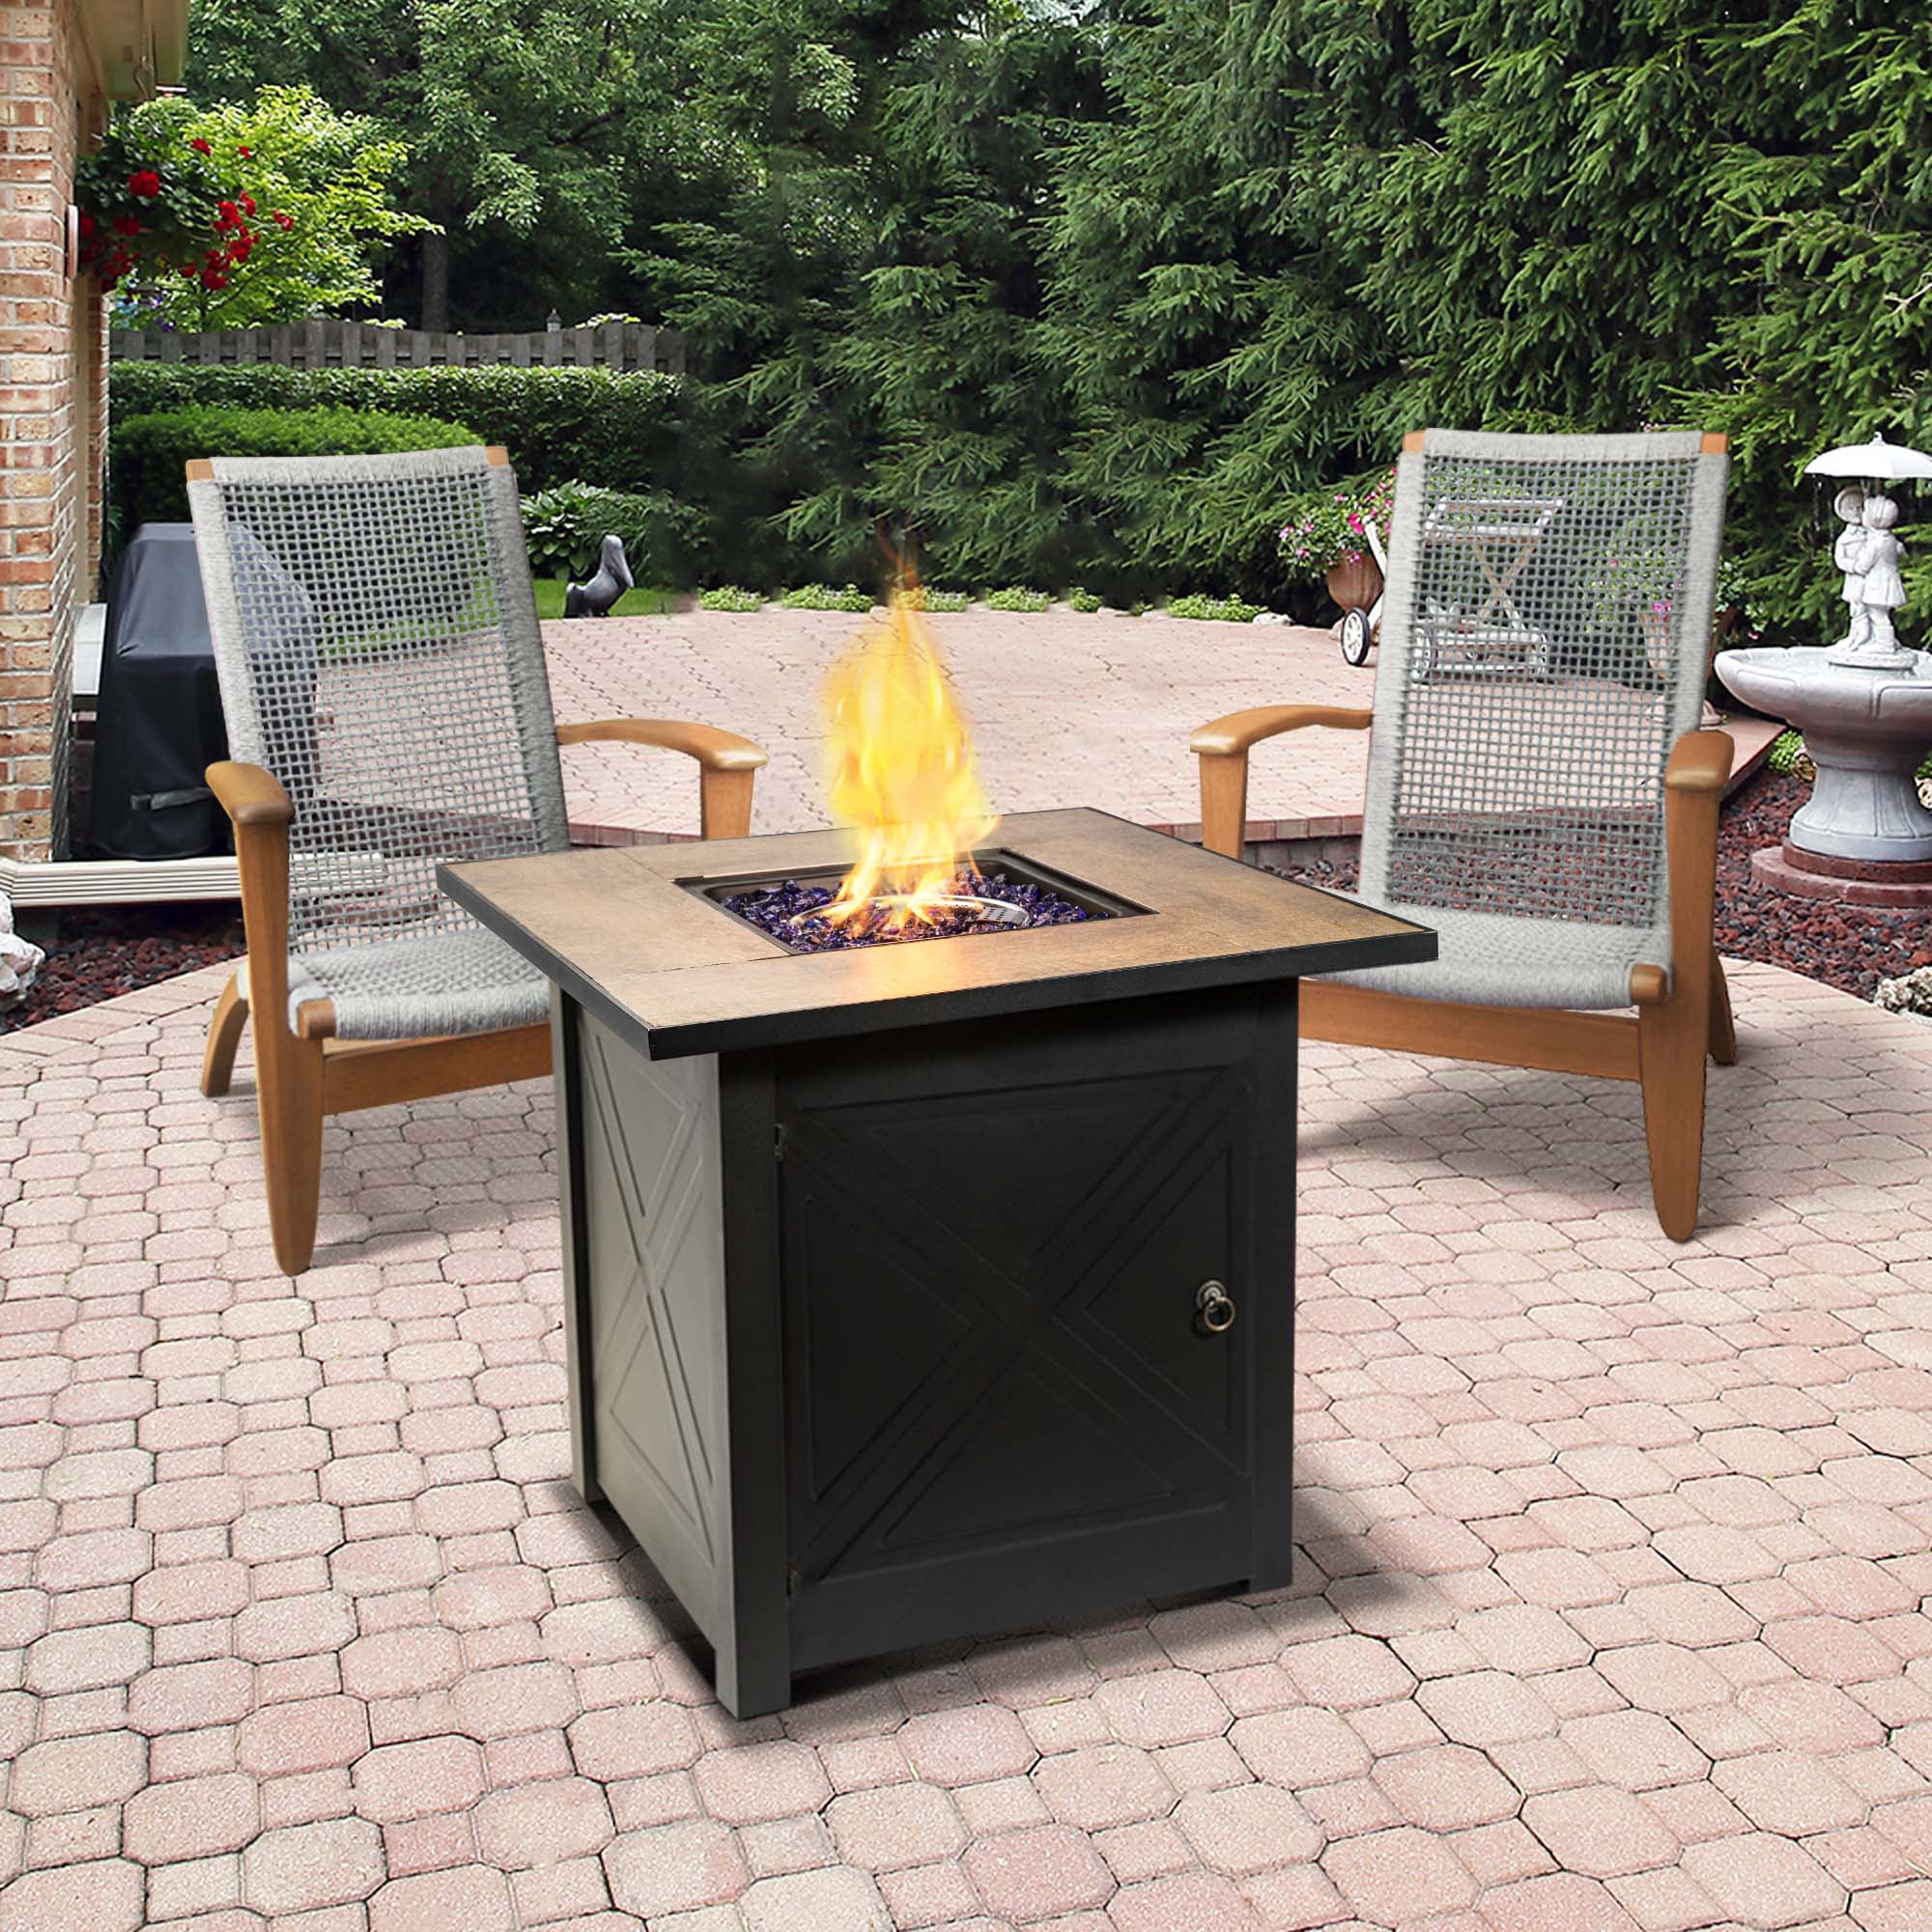 Teamson Home Outdoor Square 30" Propane Ceramic Gas Fire Pit with Steel Base, Black/Stone